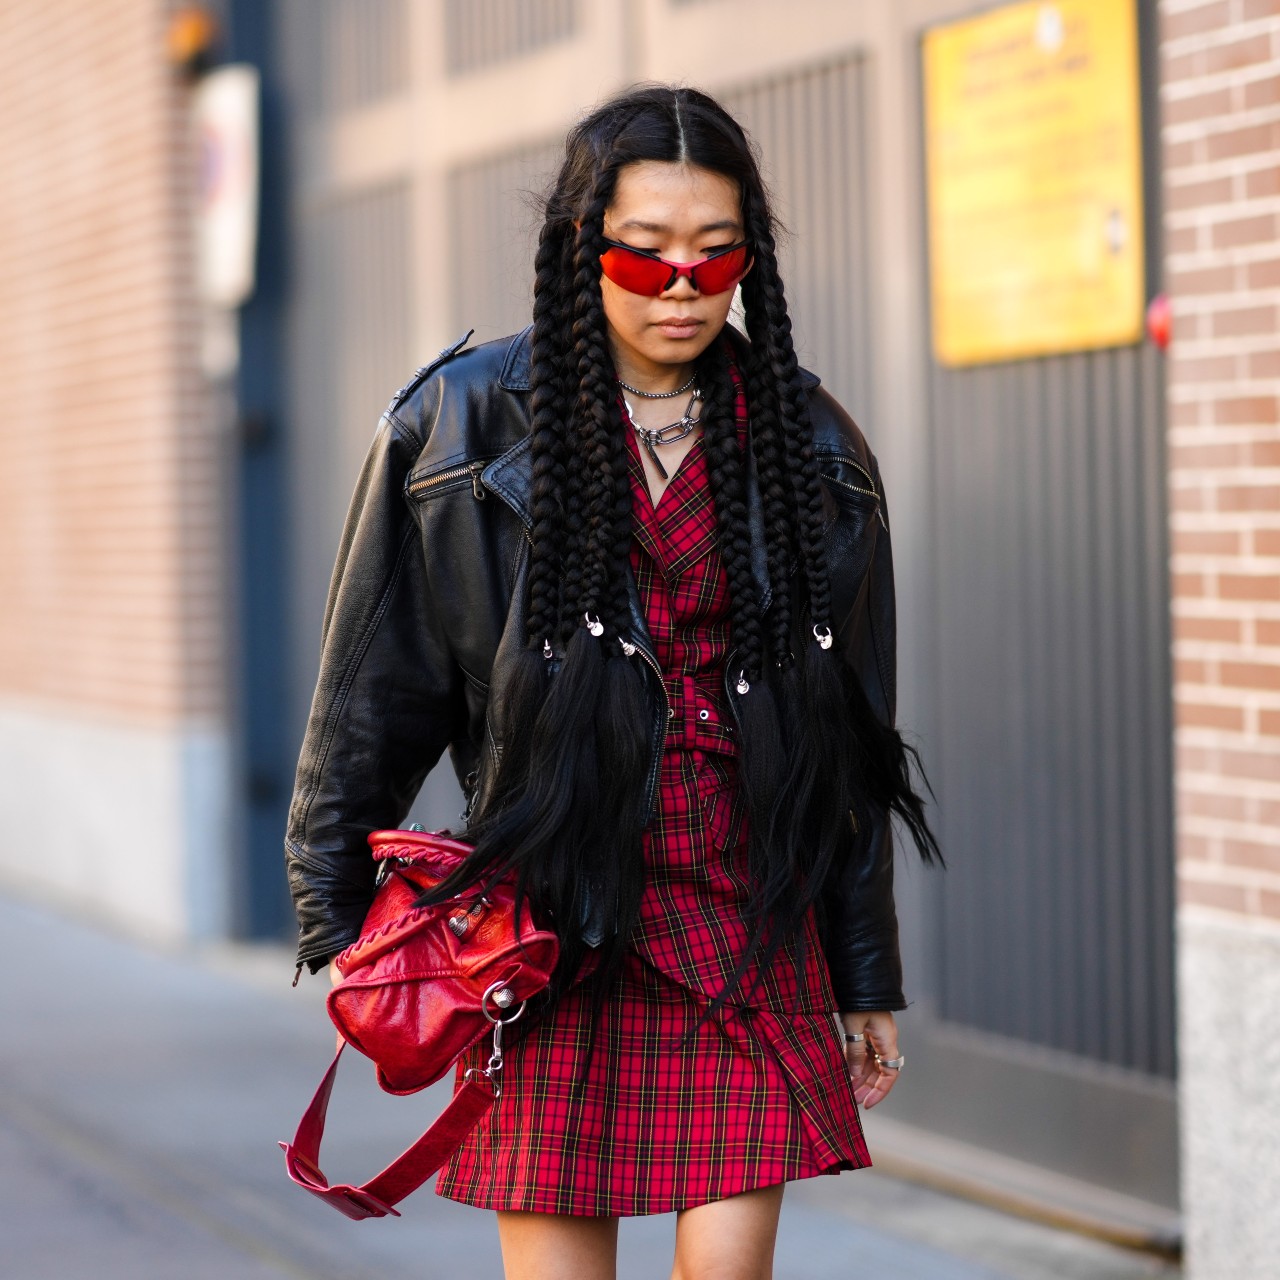 The Best Grunge Outfits For Women